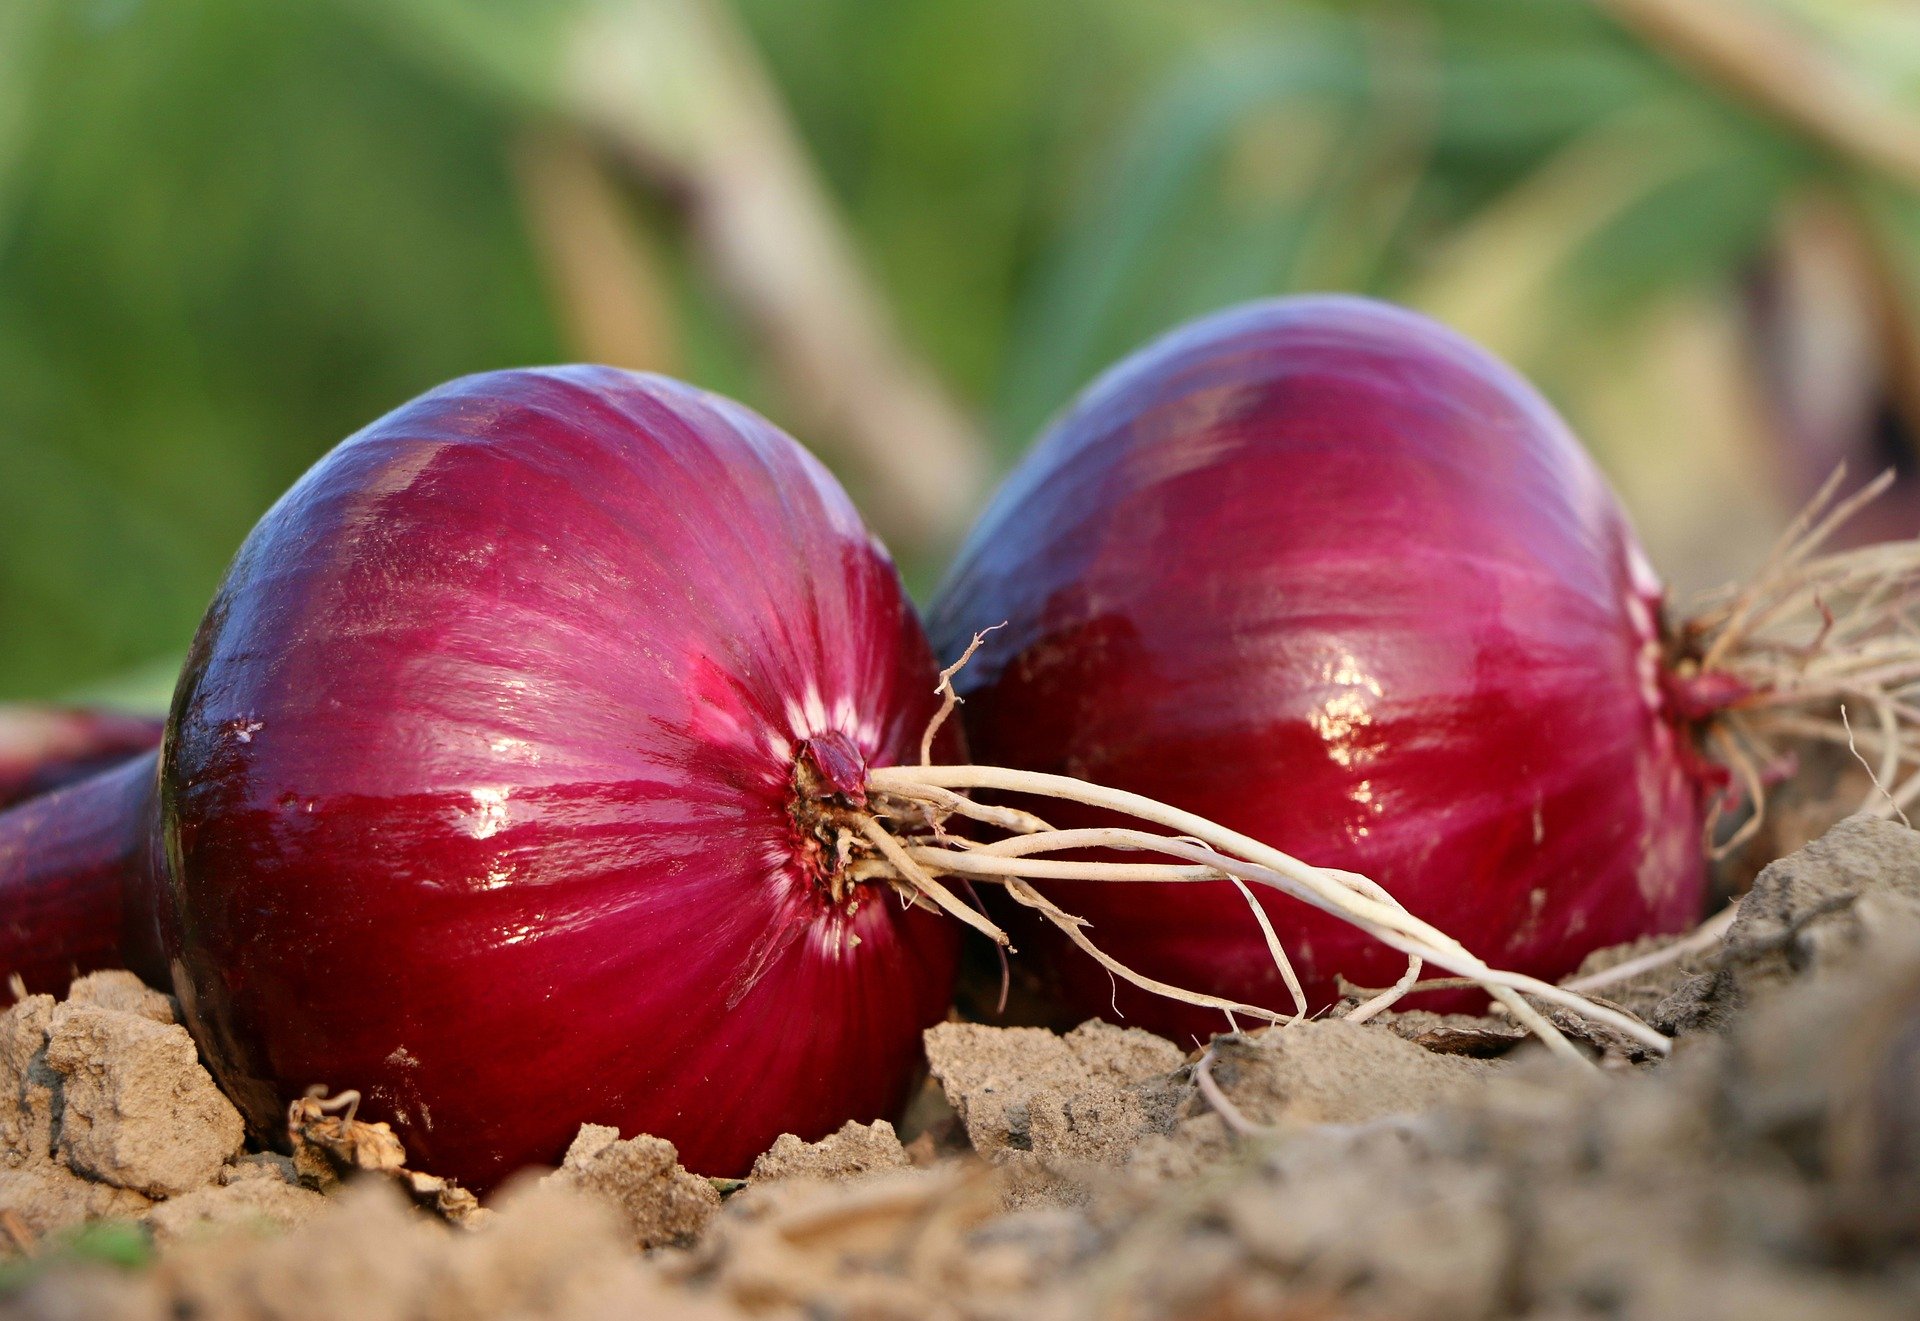 onion for hair problem solution